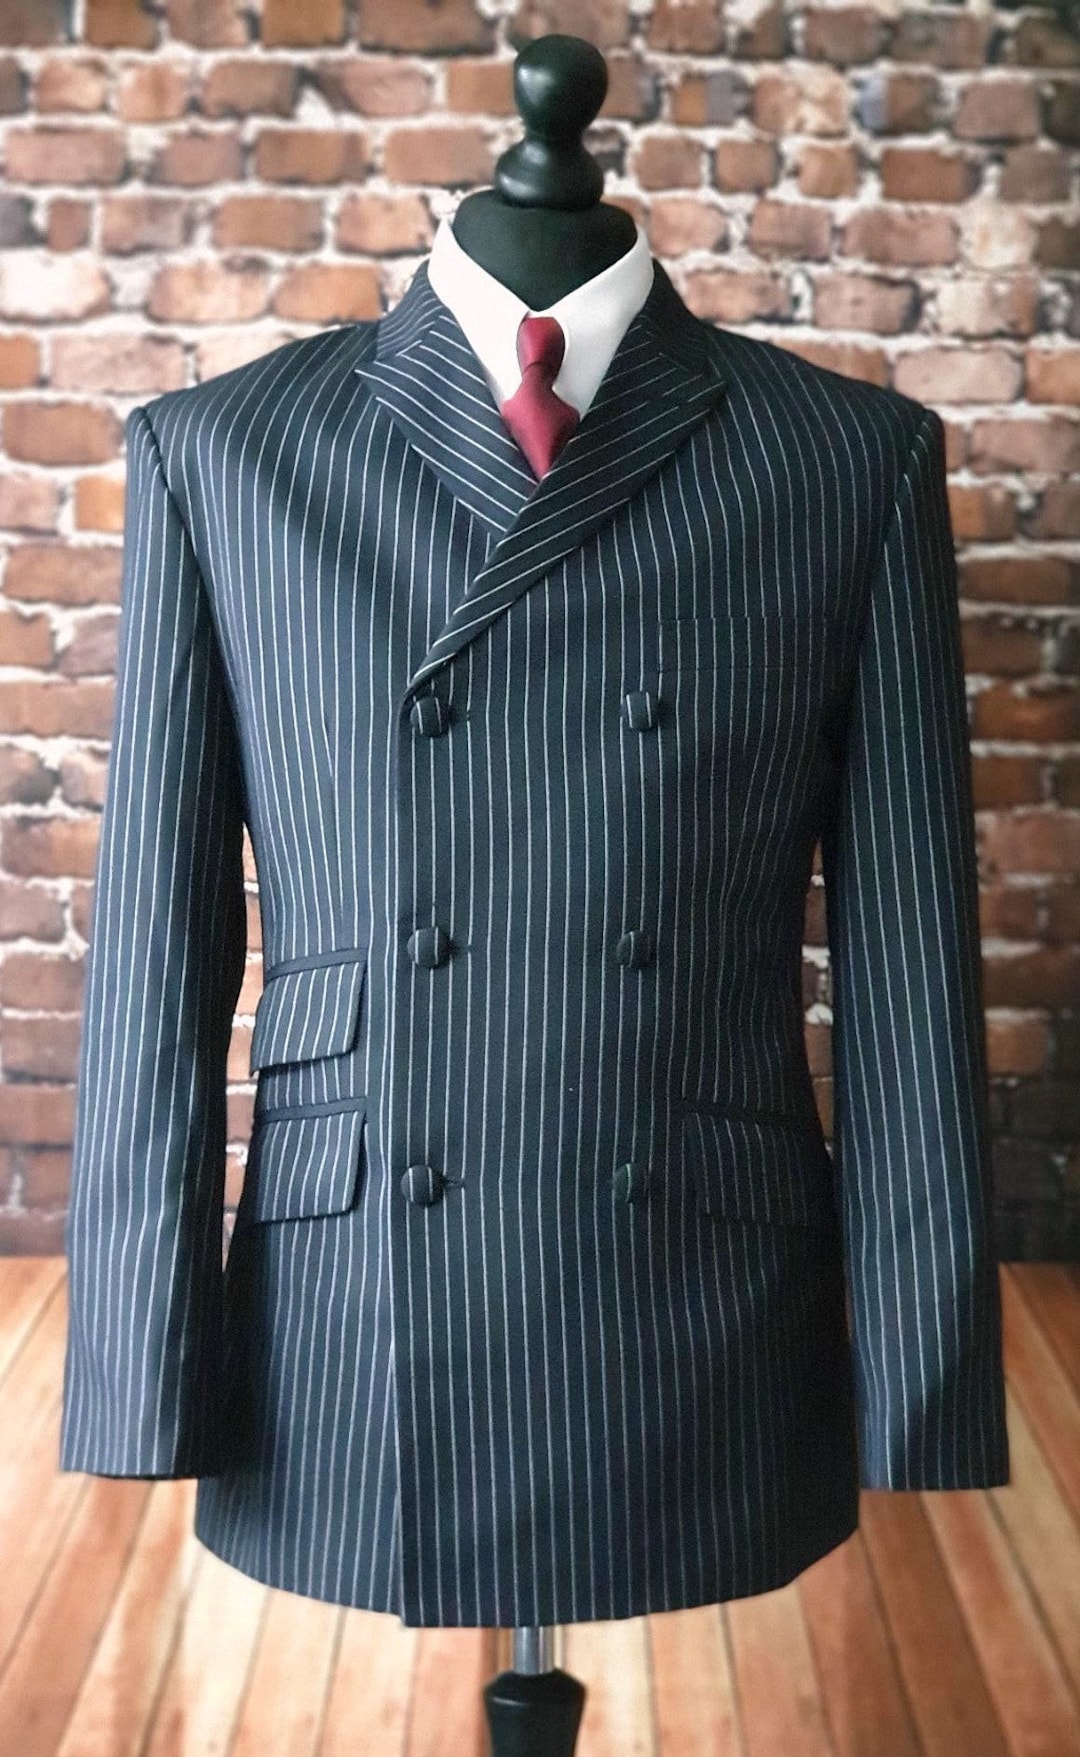 Mod Suit Double Breasted Suit Black and White Pinstripe 100% - Etsy